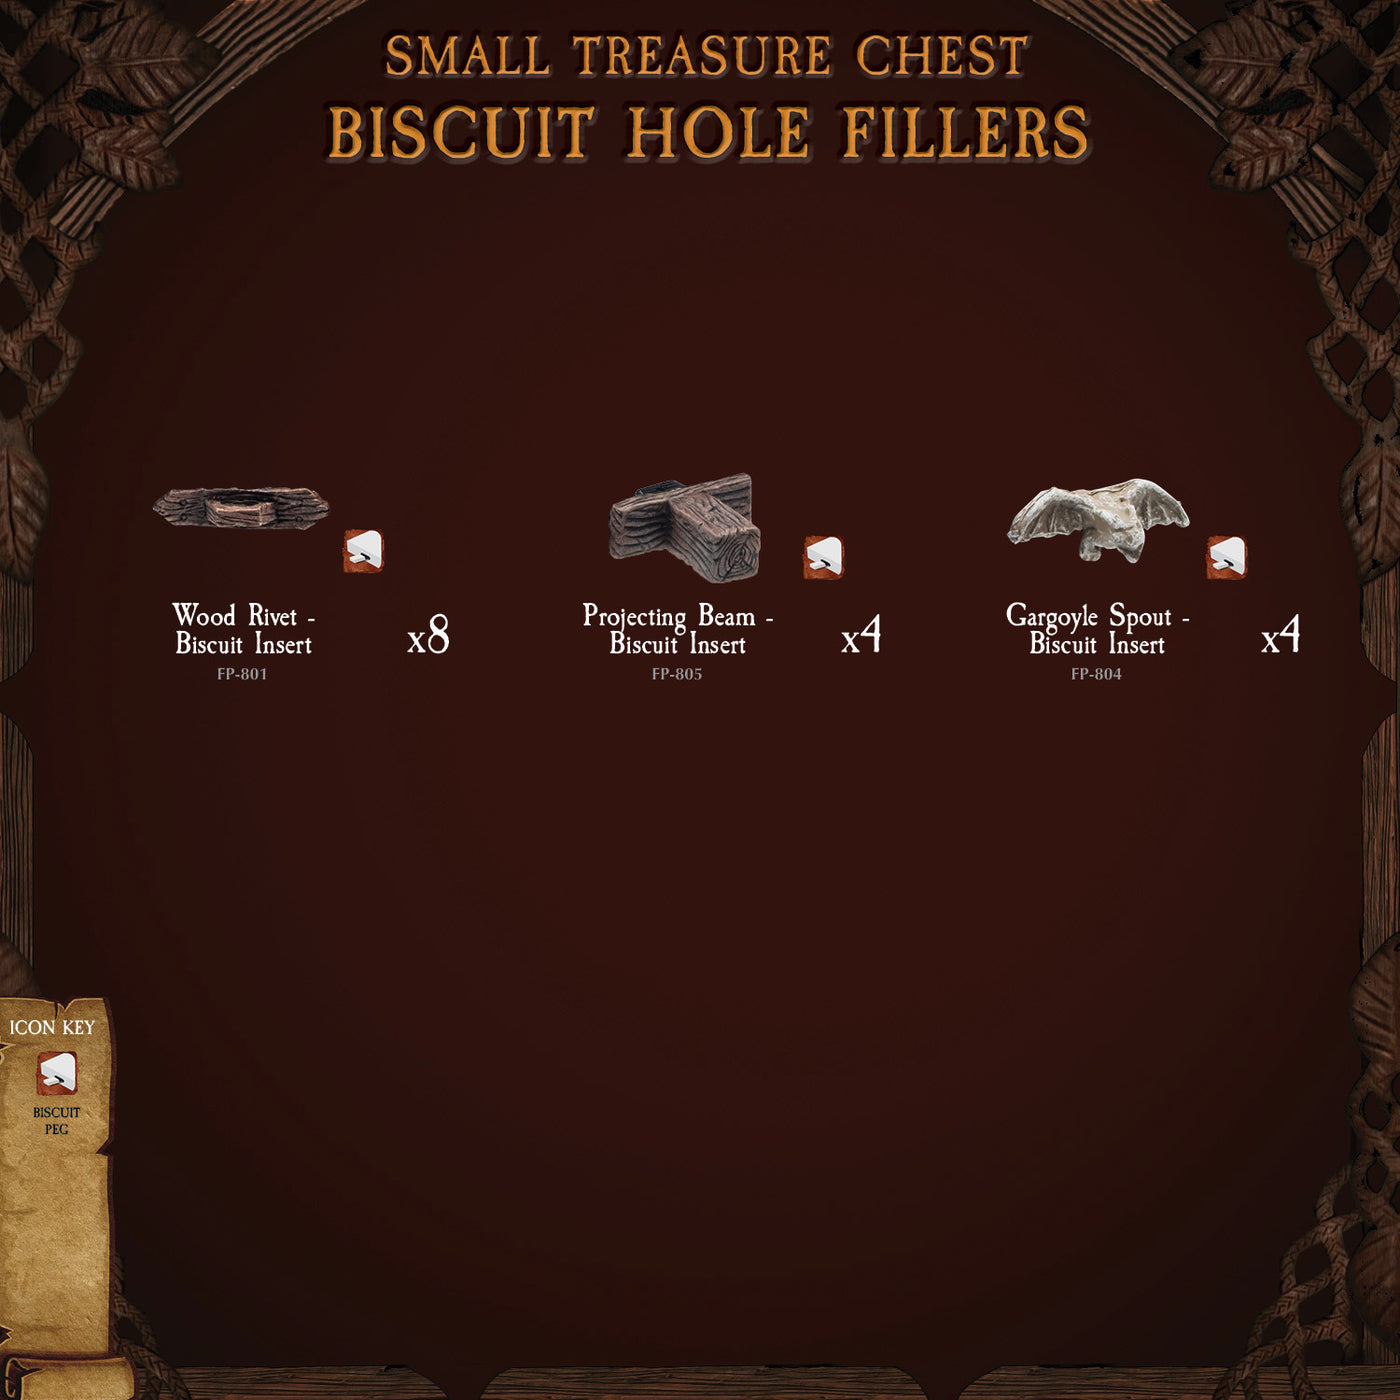 Small Treasure Chest - Biscuit Hole Fillers (Painted)